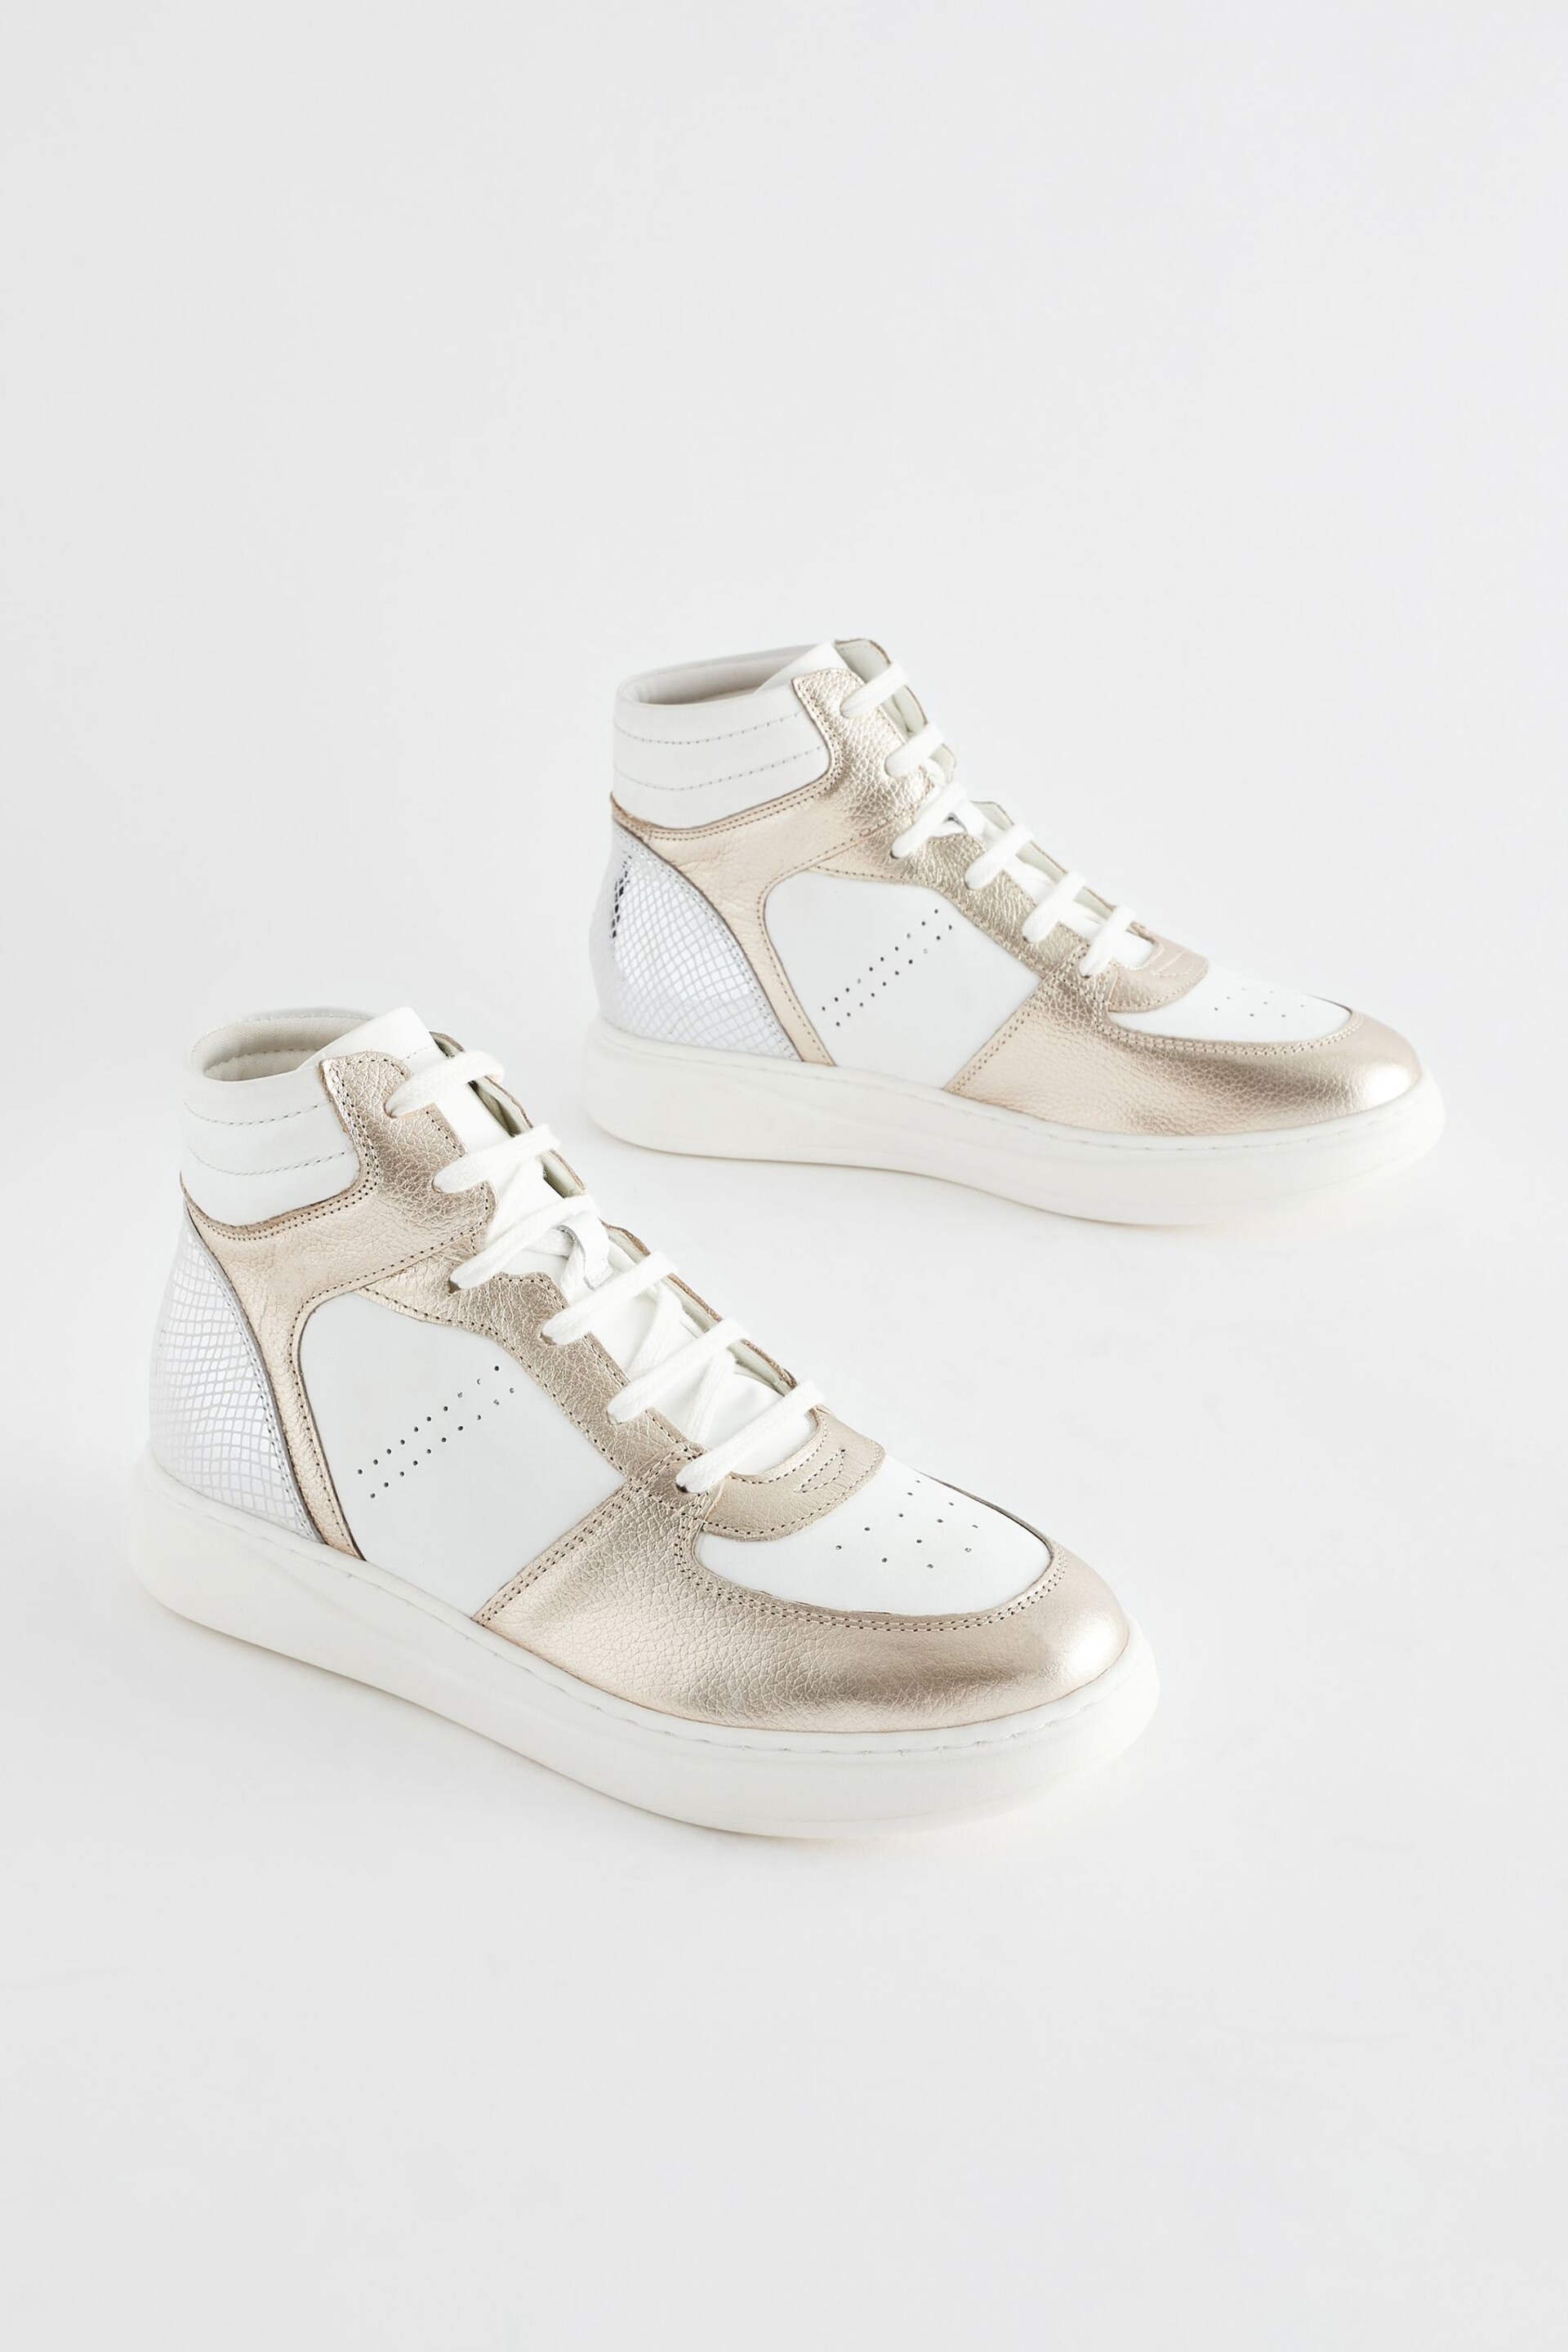 White/Gold Signature Leather High Top Trainers - Image 1 of 5